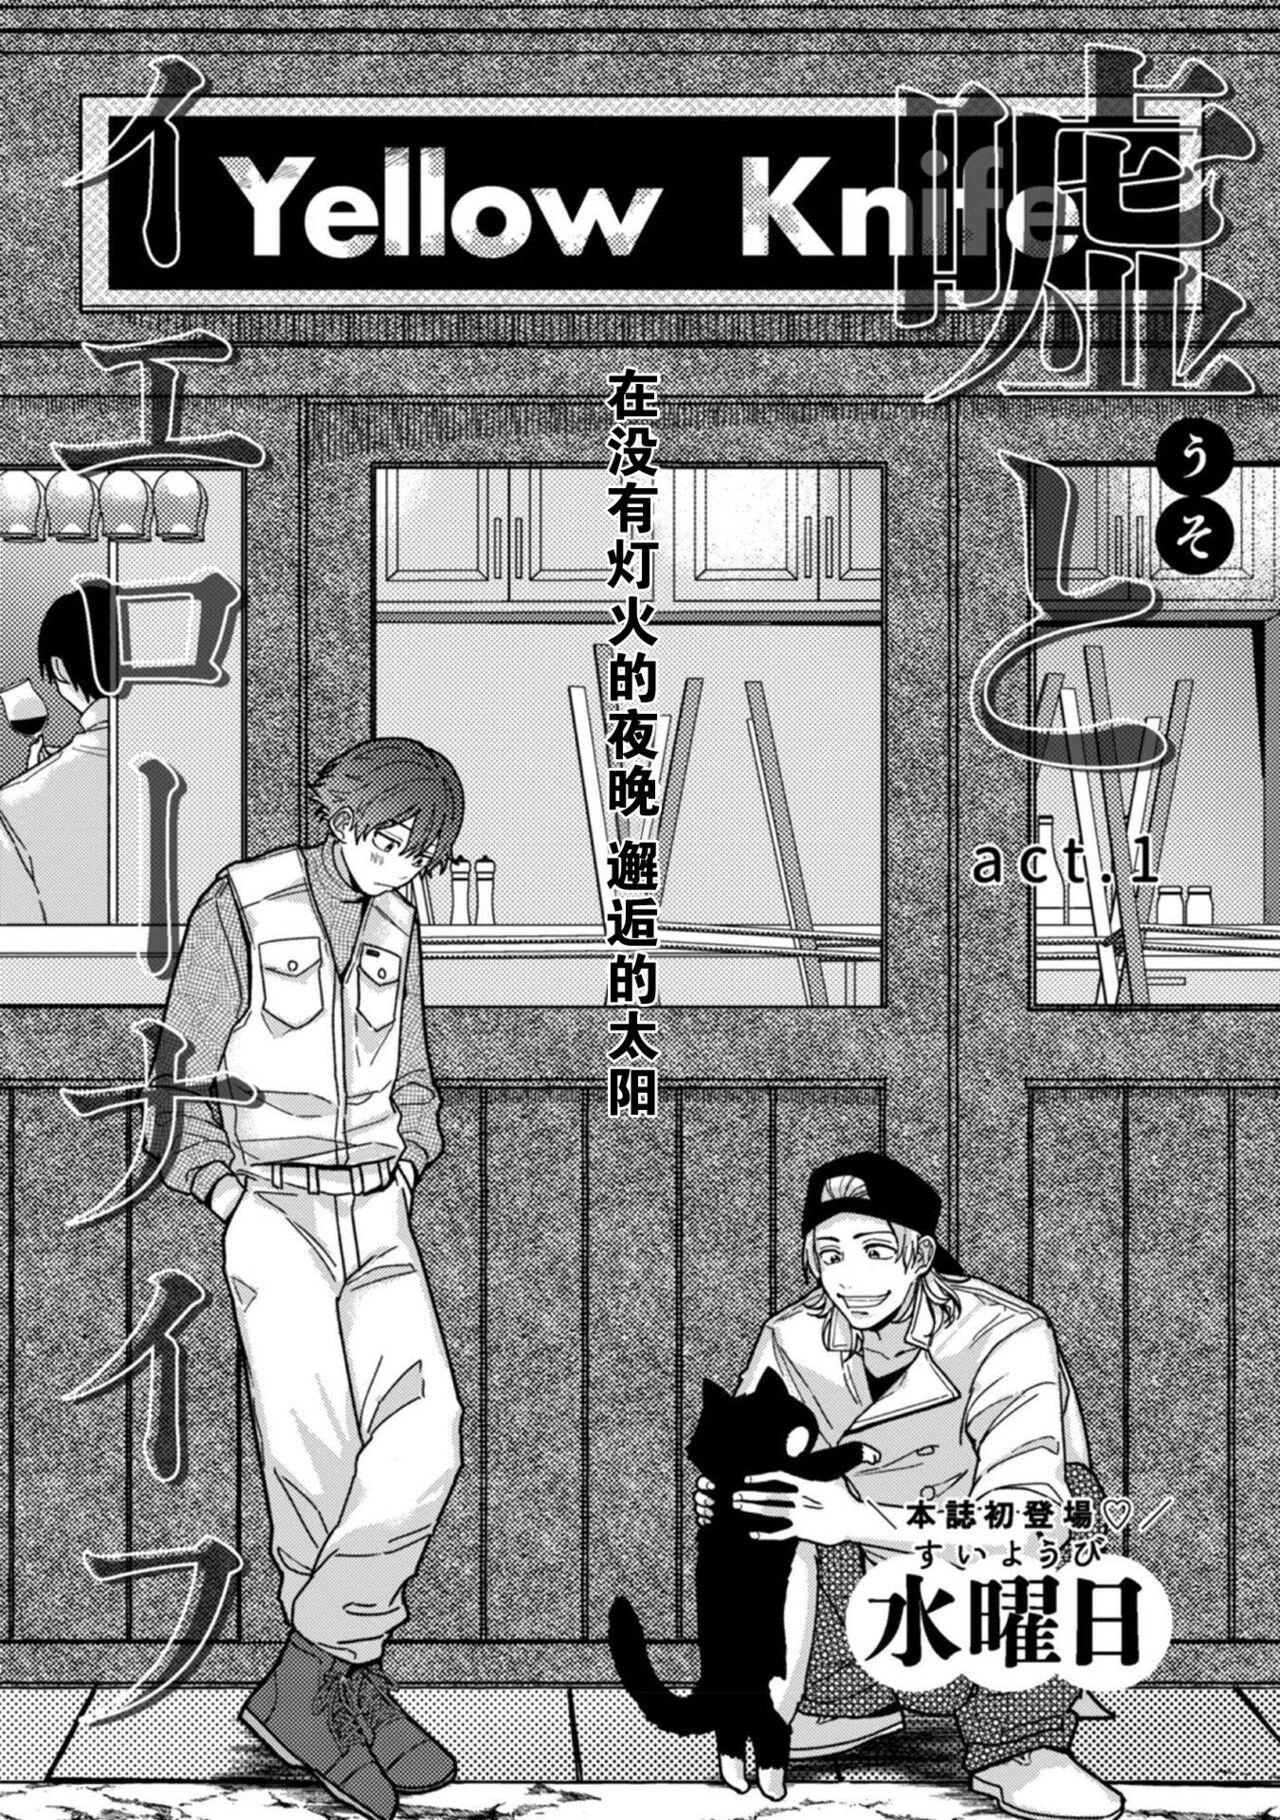 Strap On Uso to Yellowknife | 谎言与黄色小刀 Sextape - Page 5